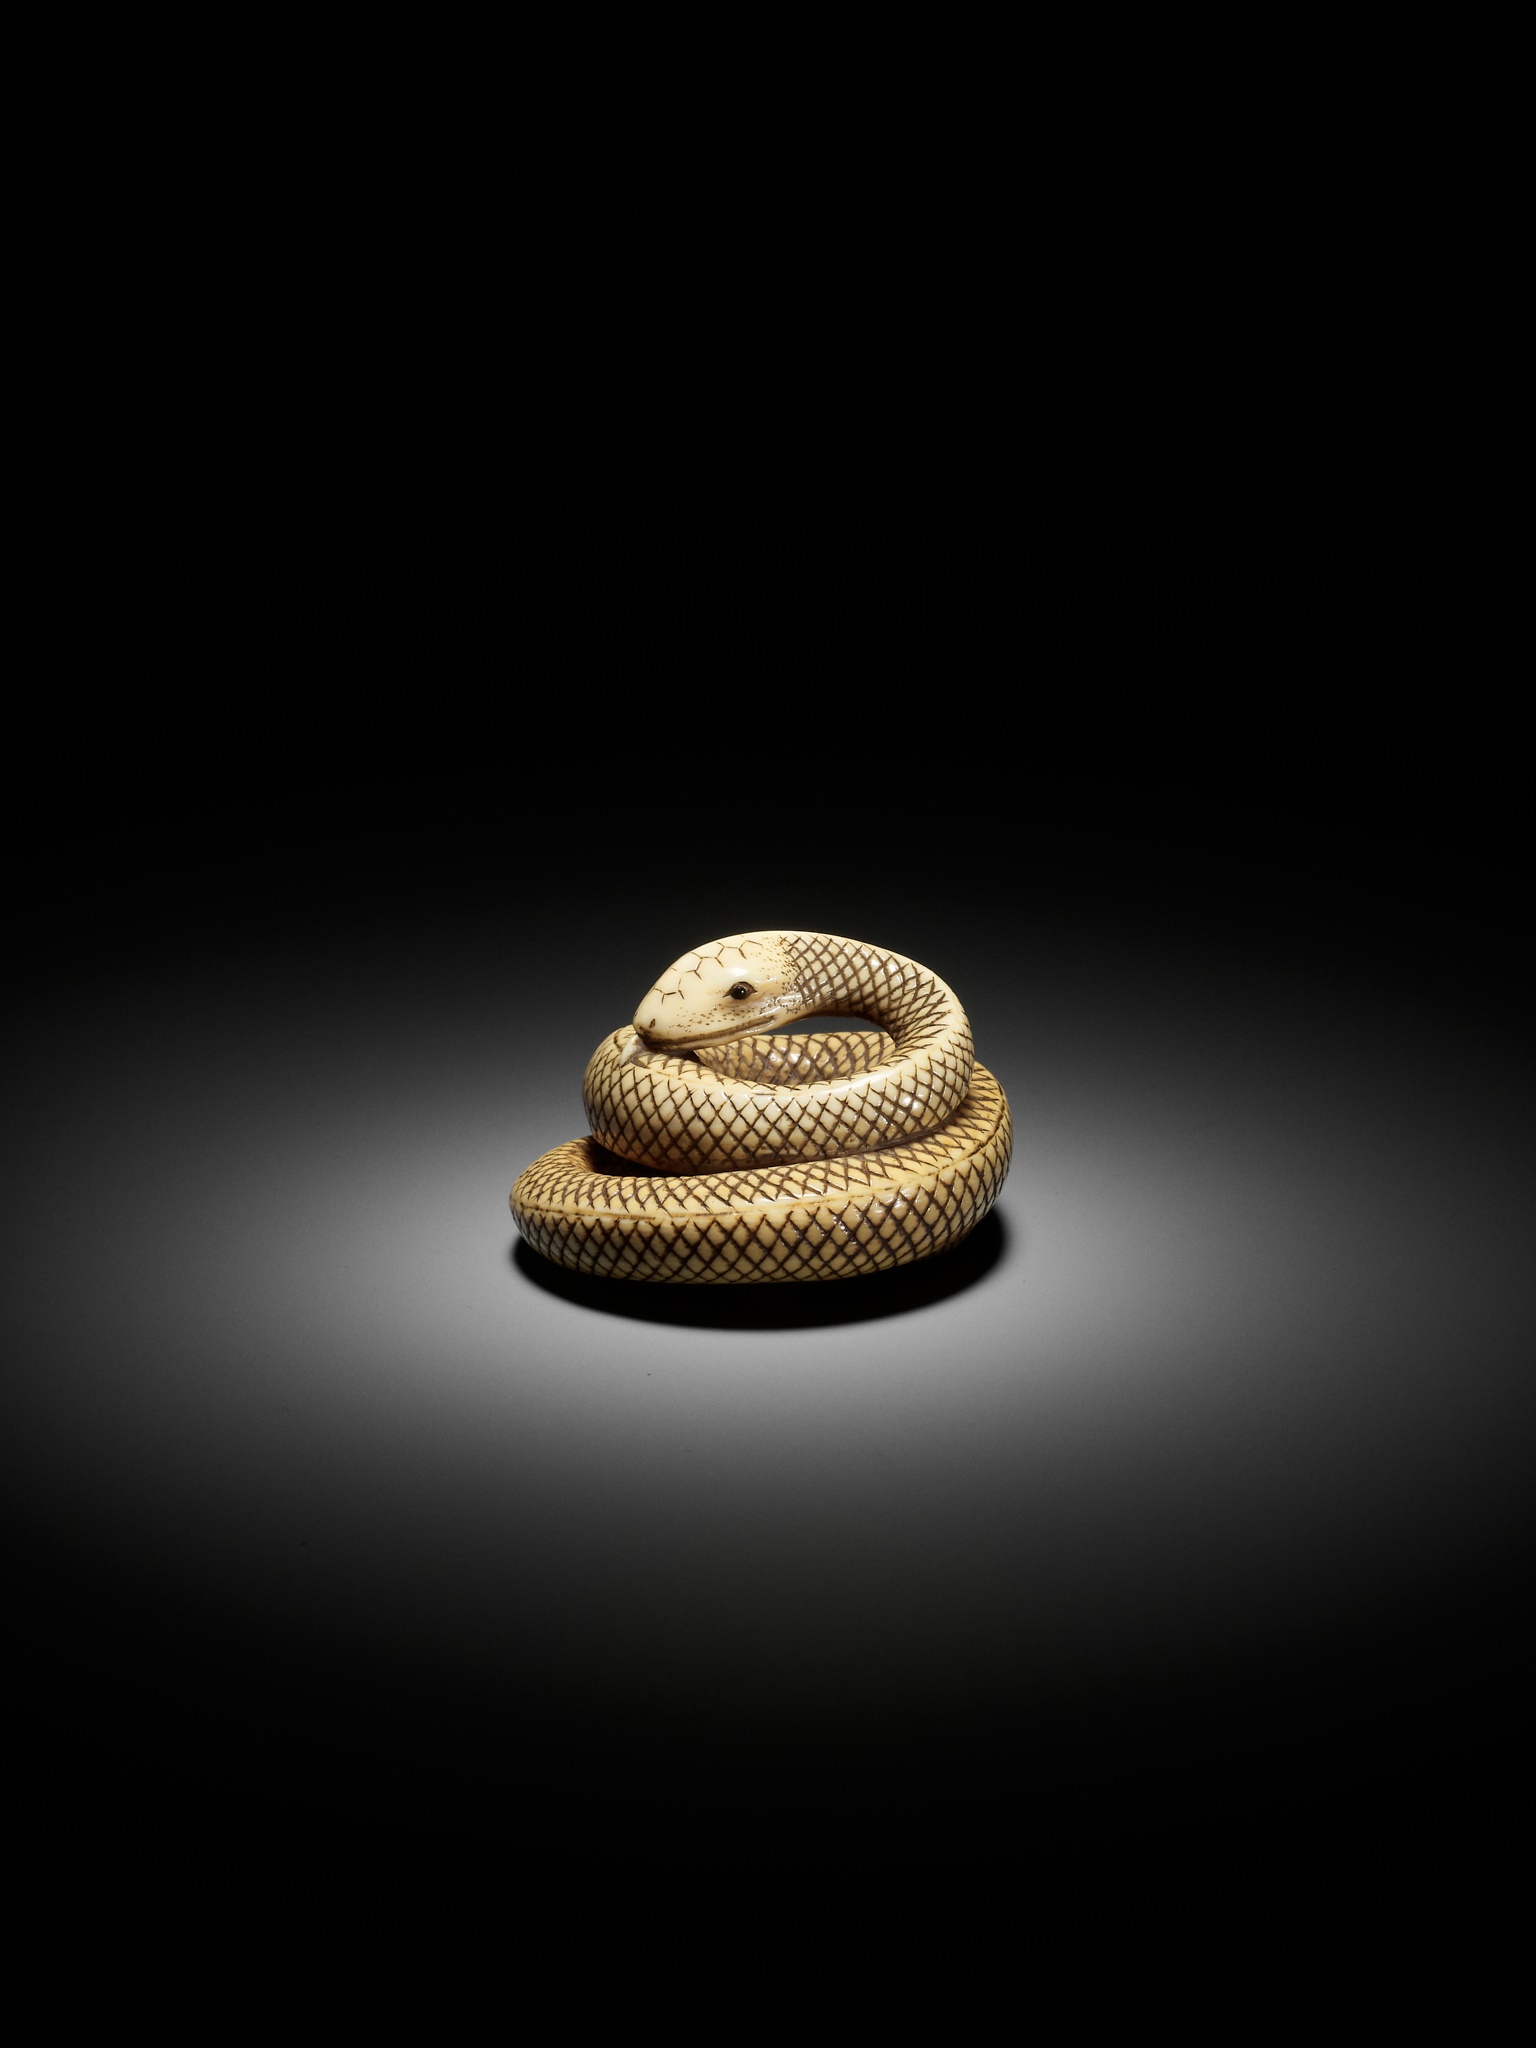 AN IVORY NETSUKE OF A COILED SNAKE, ATTRIBUTED TO OKATOMO - Image 8 of 16